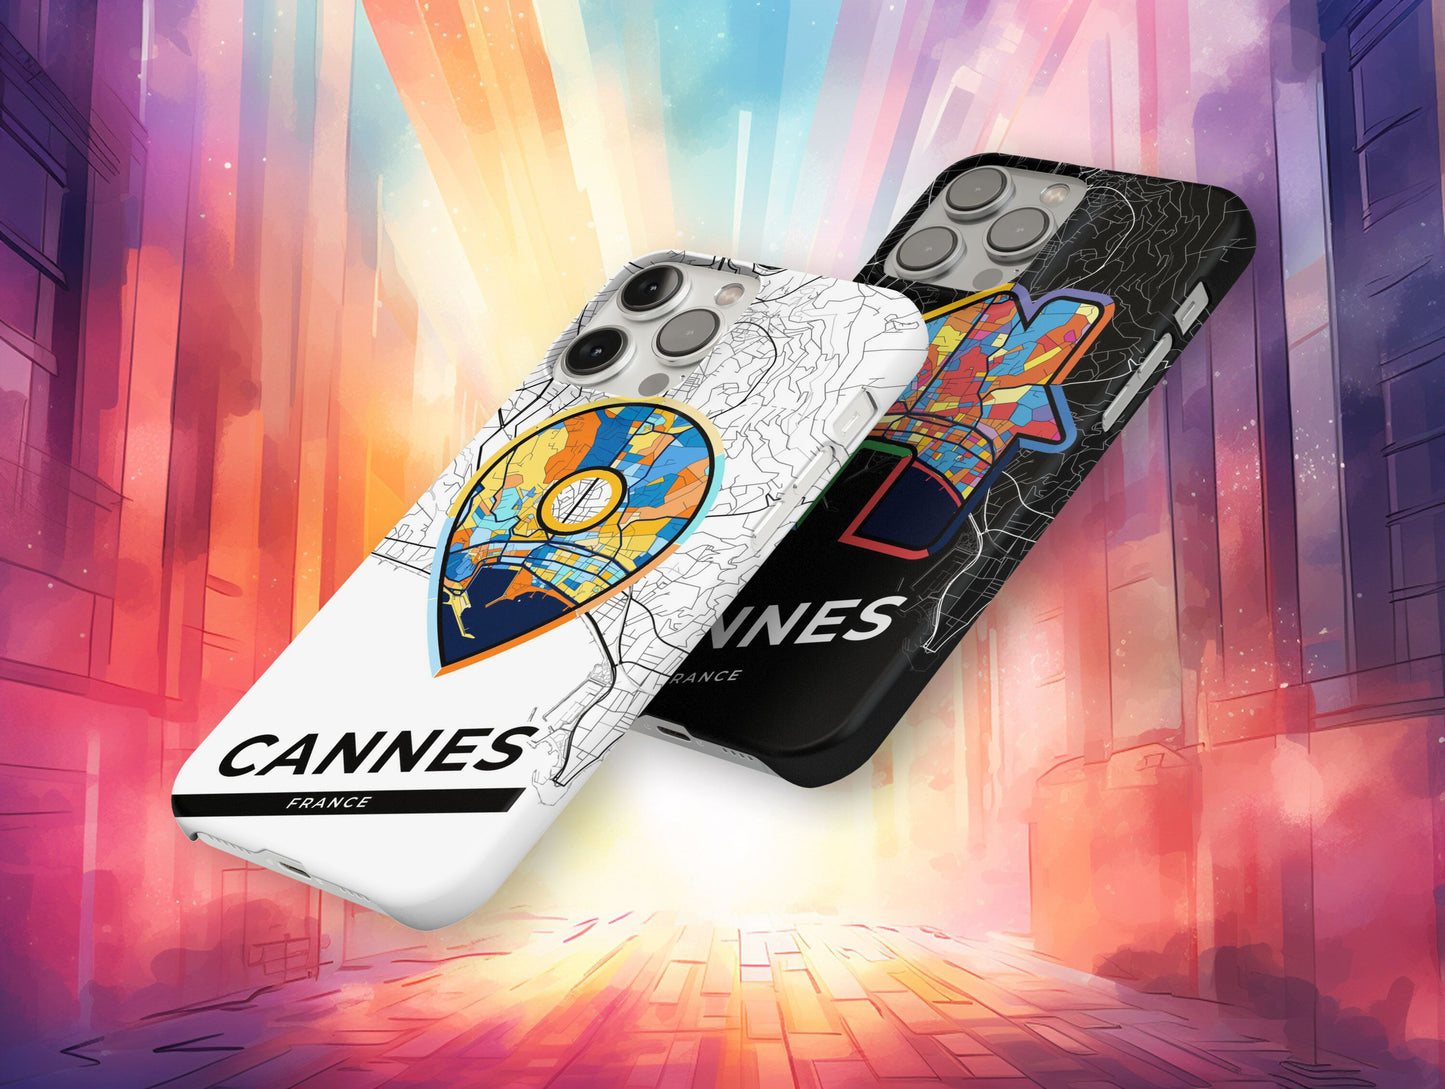 Cannes France slim phone case with colorful icon. Birthday, wedding or housewarming gift. Couple match cases.